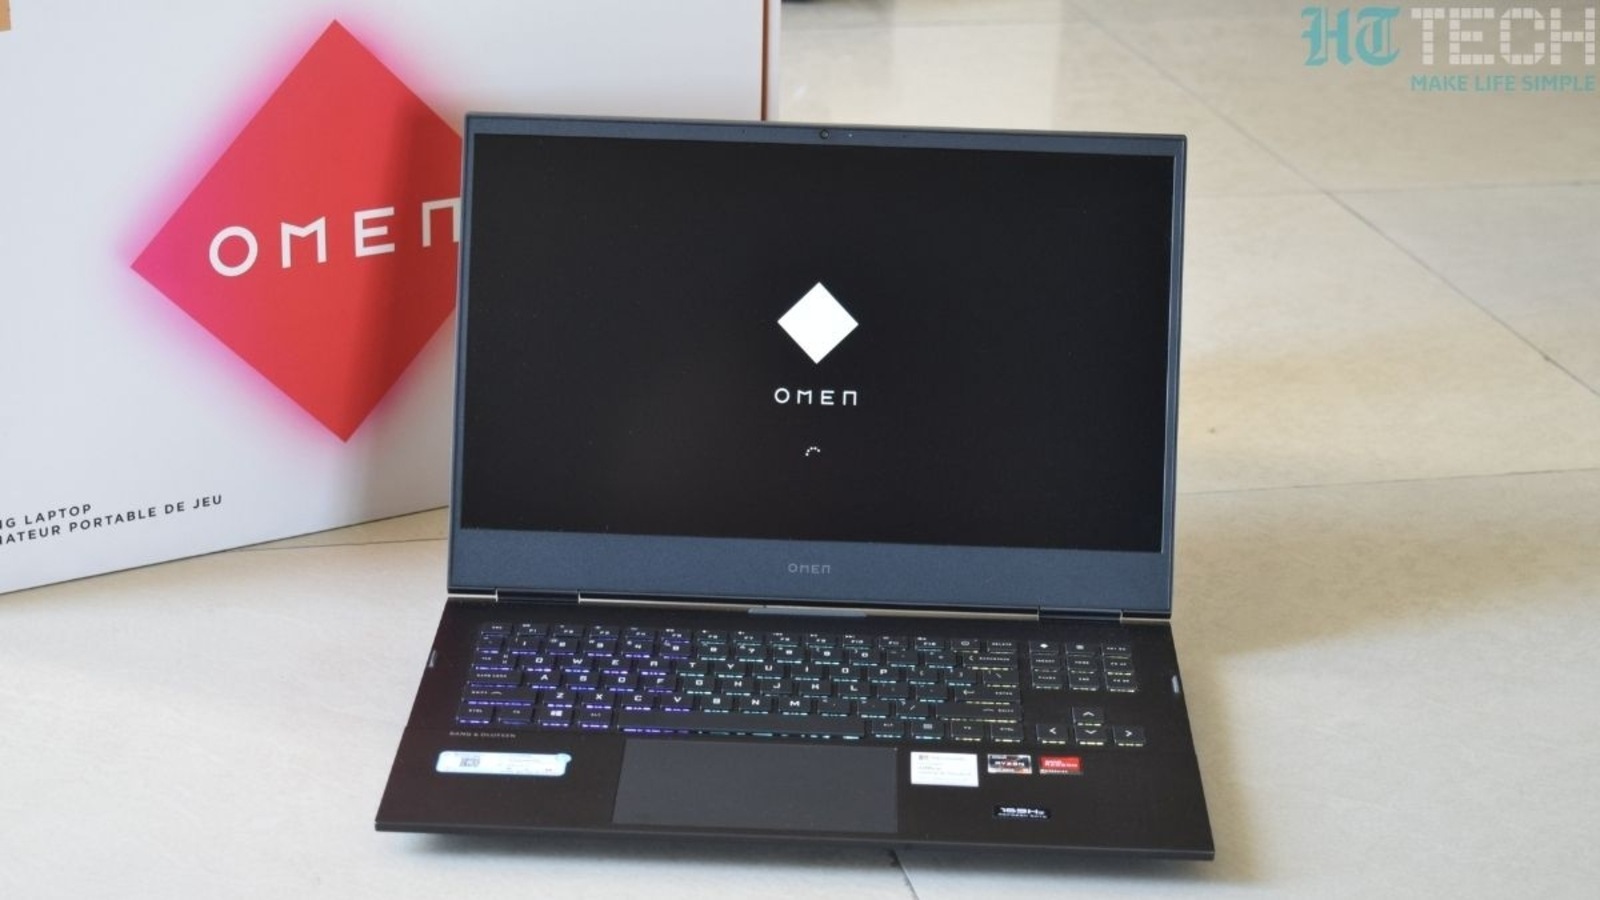 HP Omen 16 review: An affordable all-AMD gaming laptop